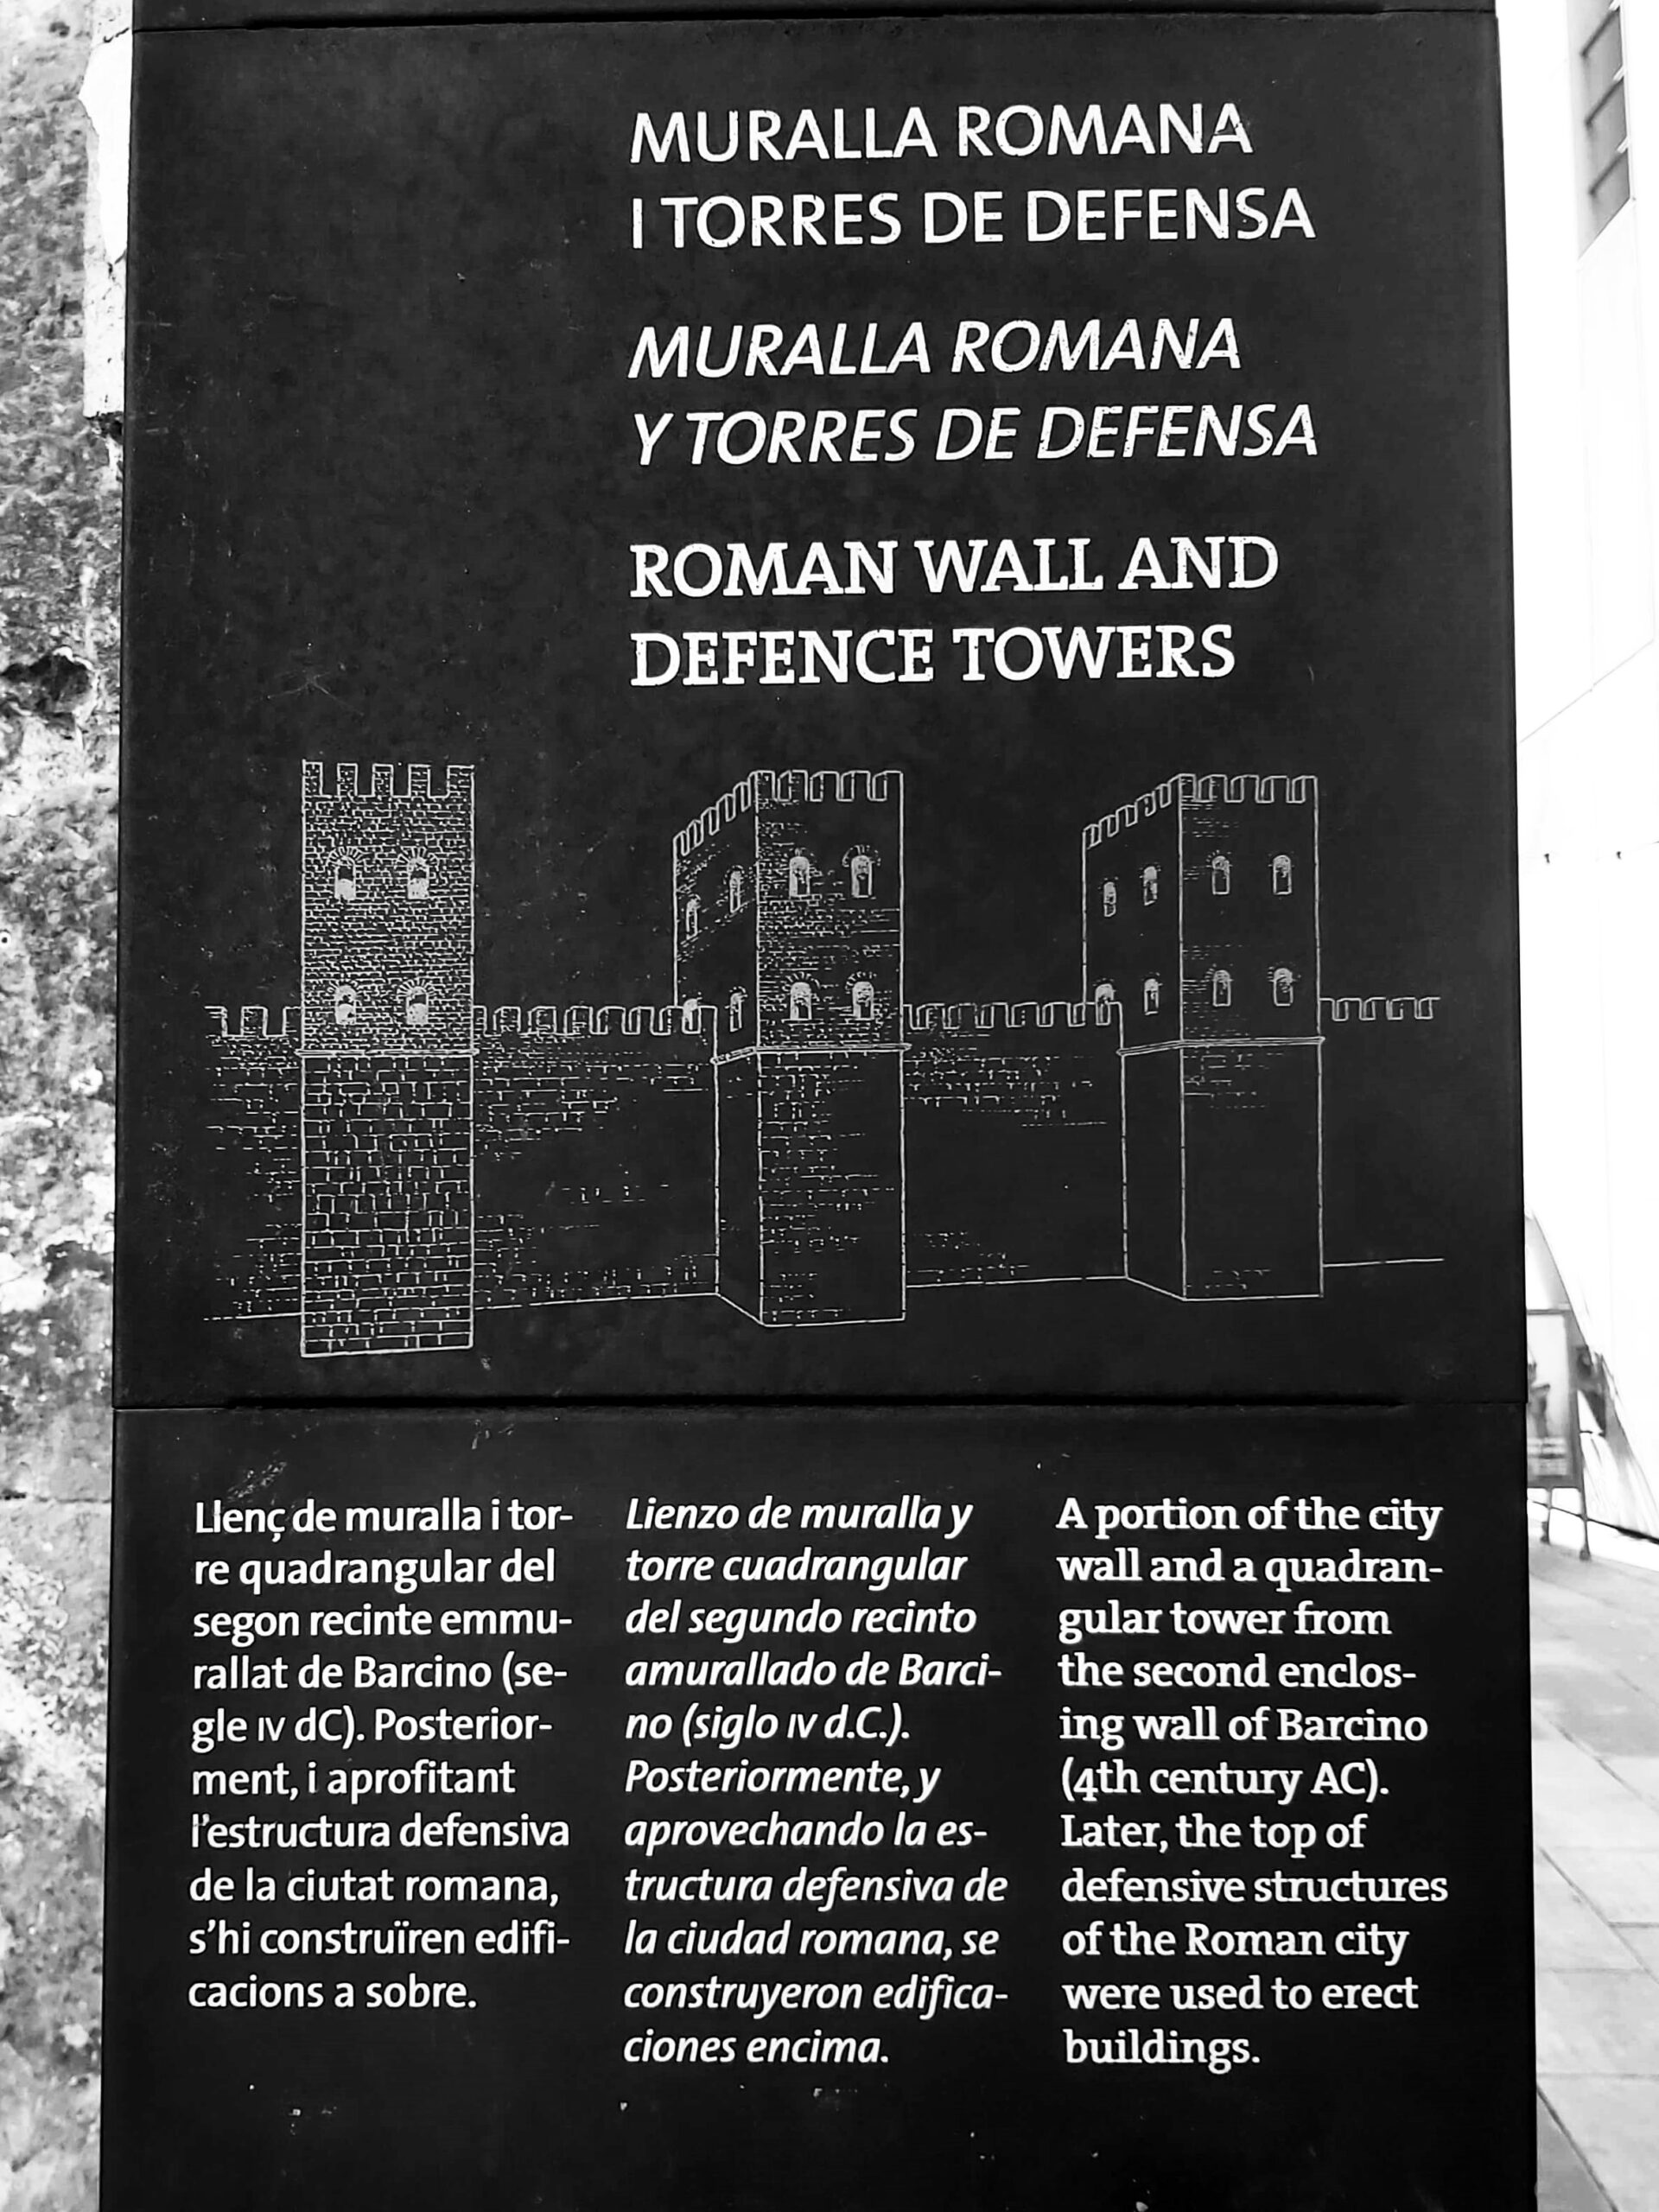 A sign about Roman wall and defence towers in Barcelona, Spain